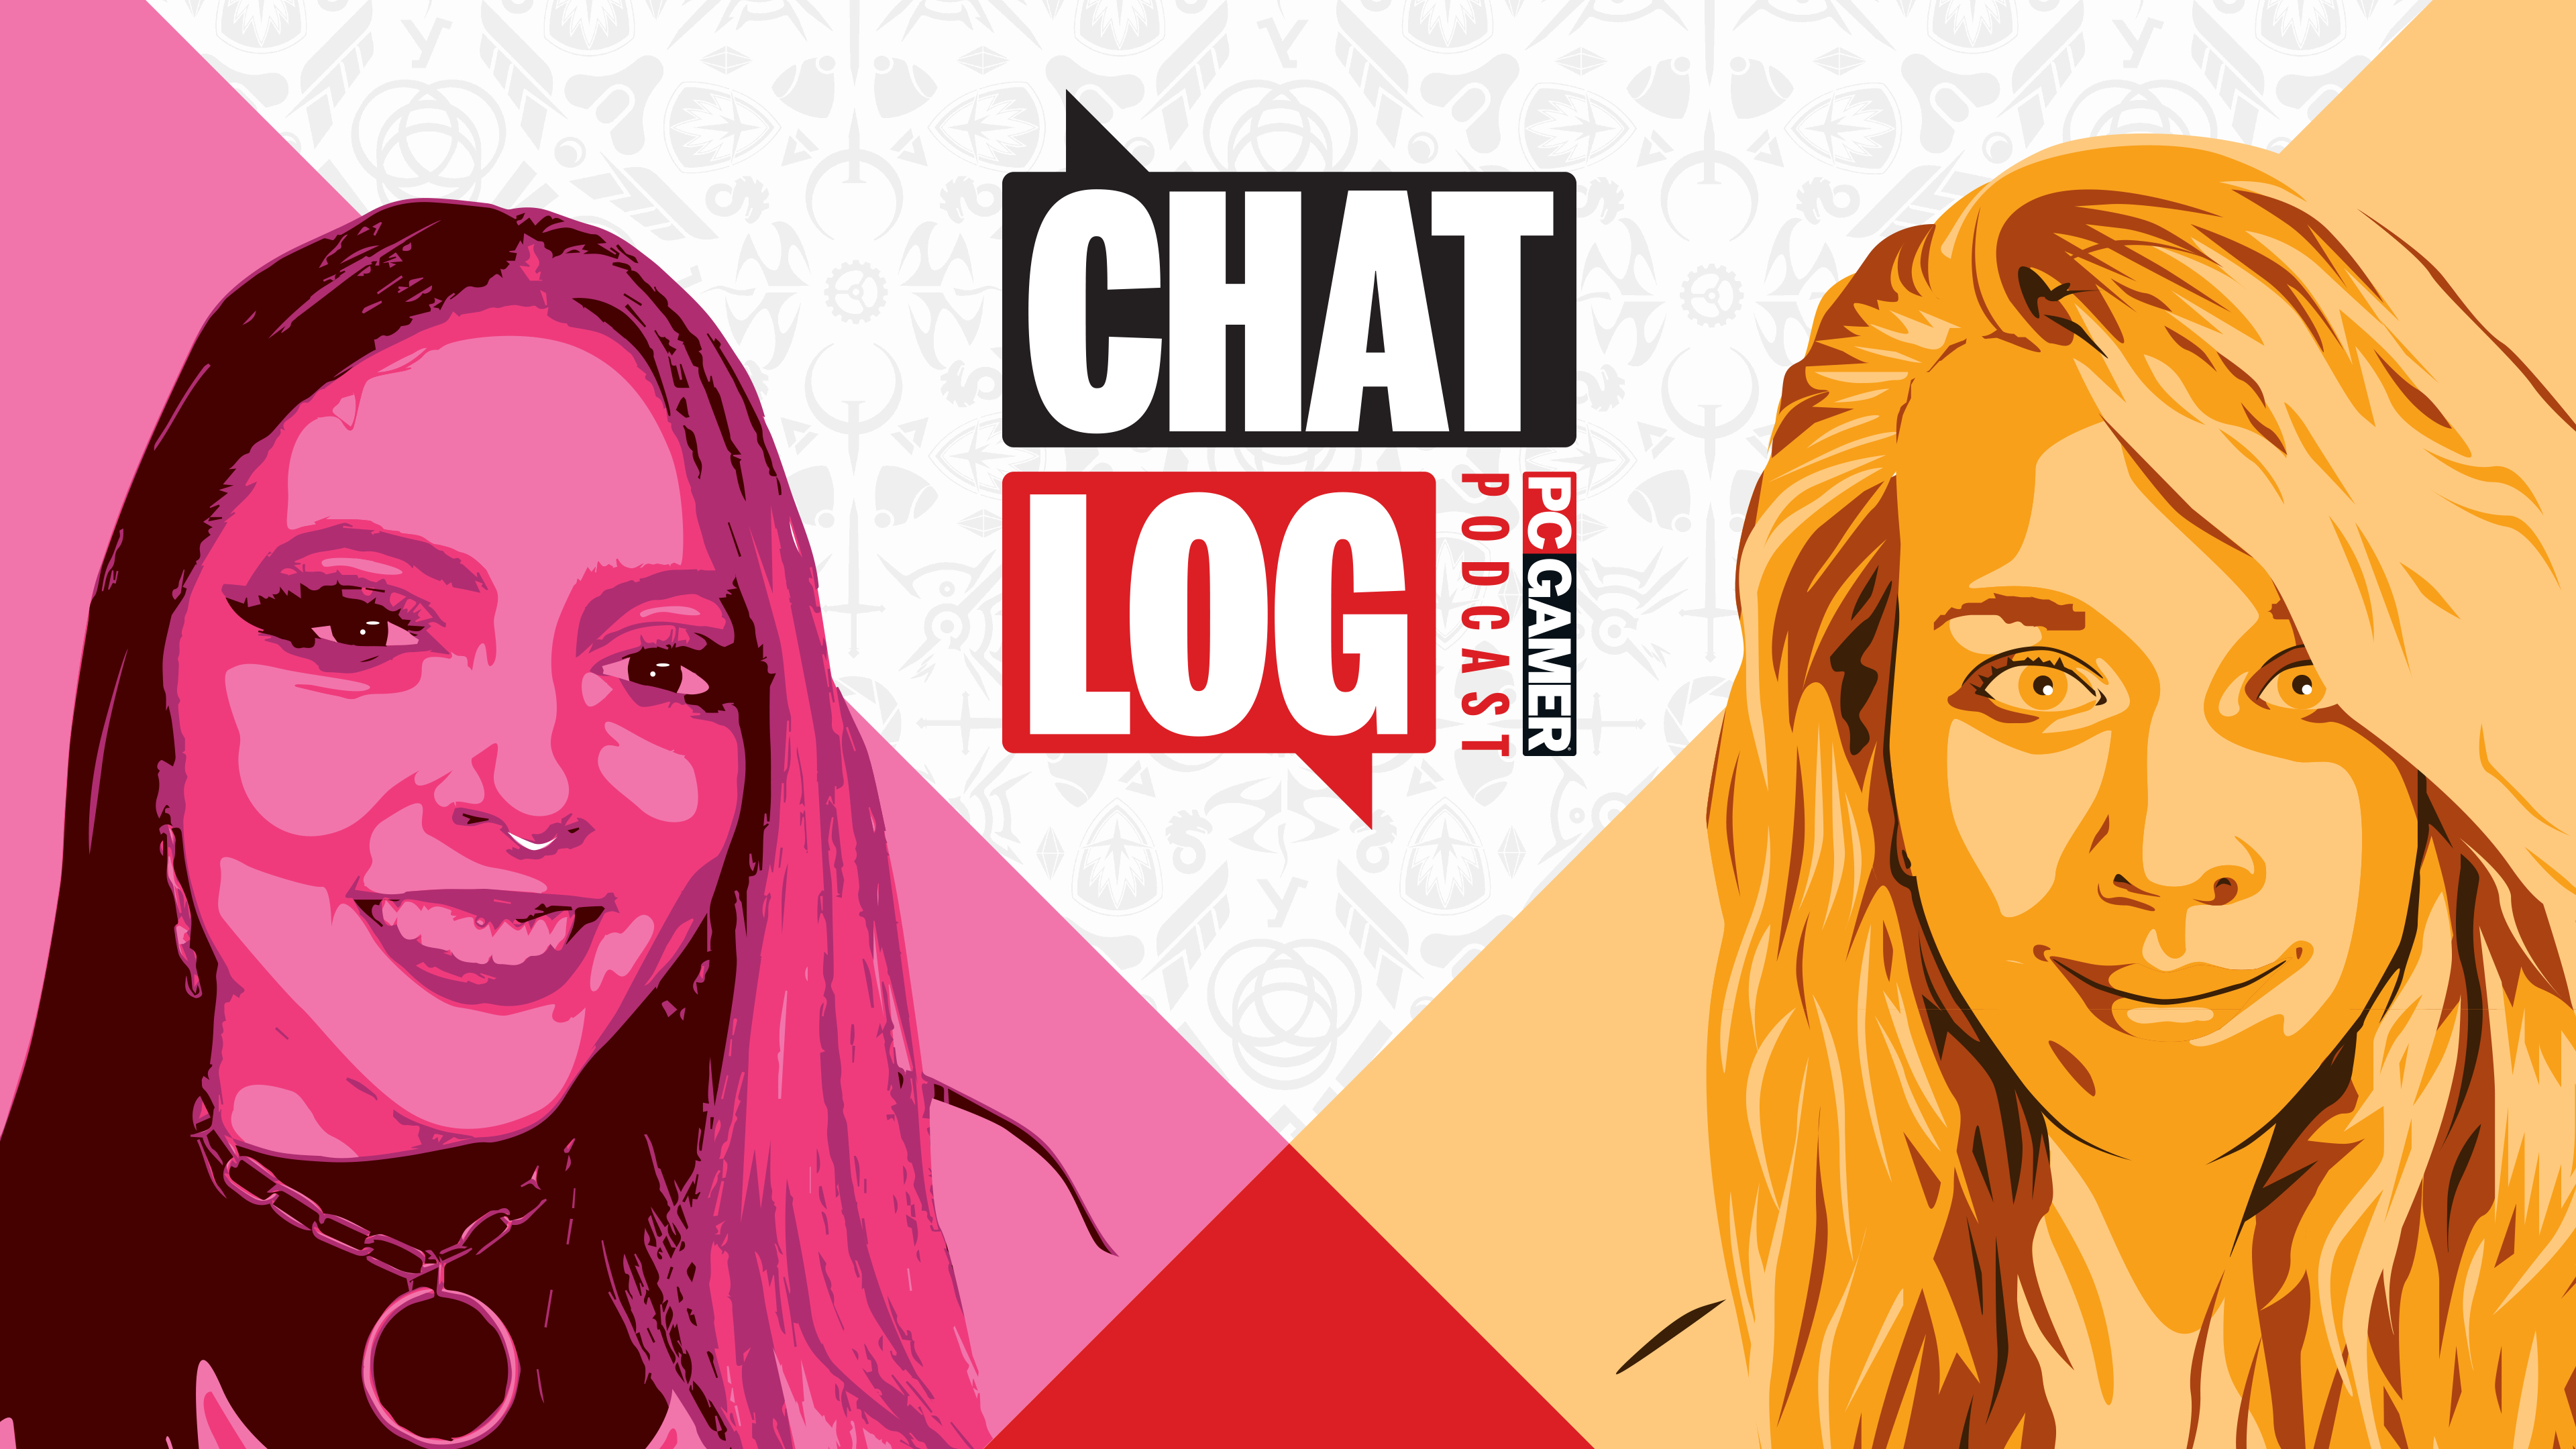  PC Gamer Chat Log Episode 53: One launcher to rule them all 